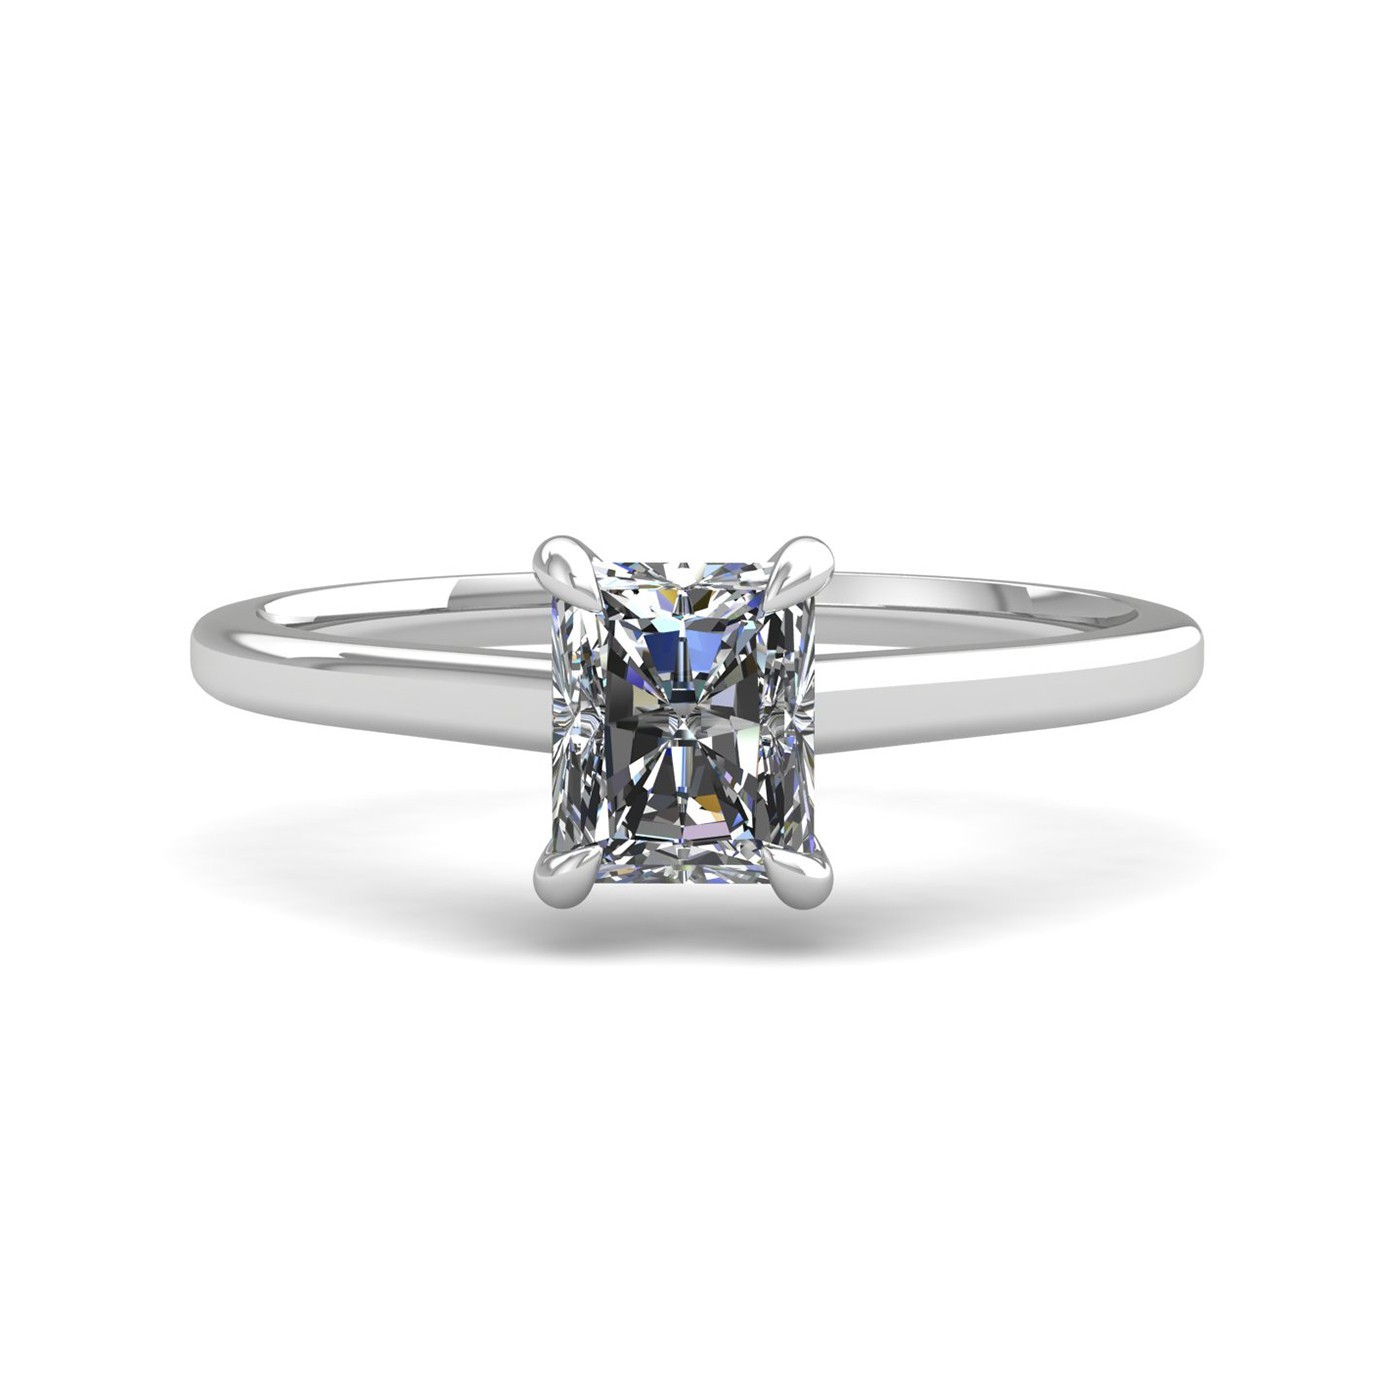 18k white gold  1,00 ct 4 prongs solitaire radiant cut diamond engagement ring with whisper thin band Photos & images